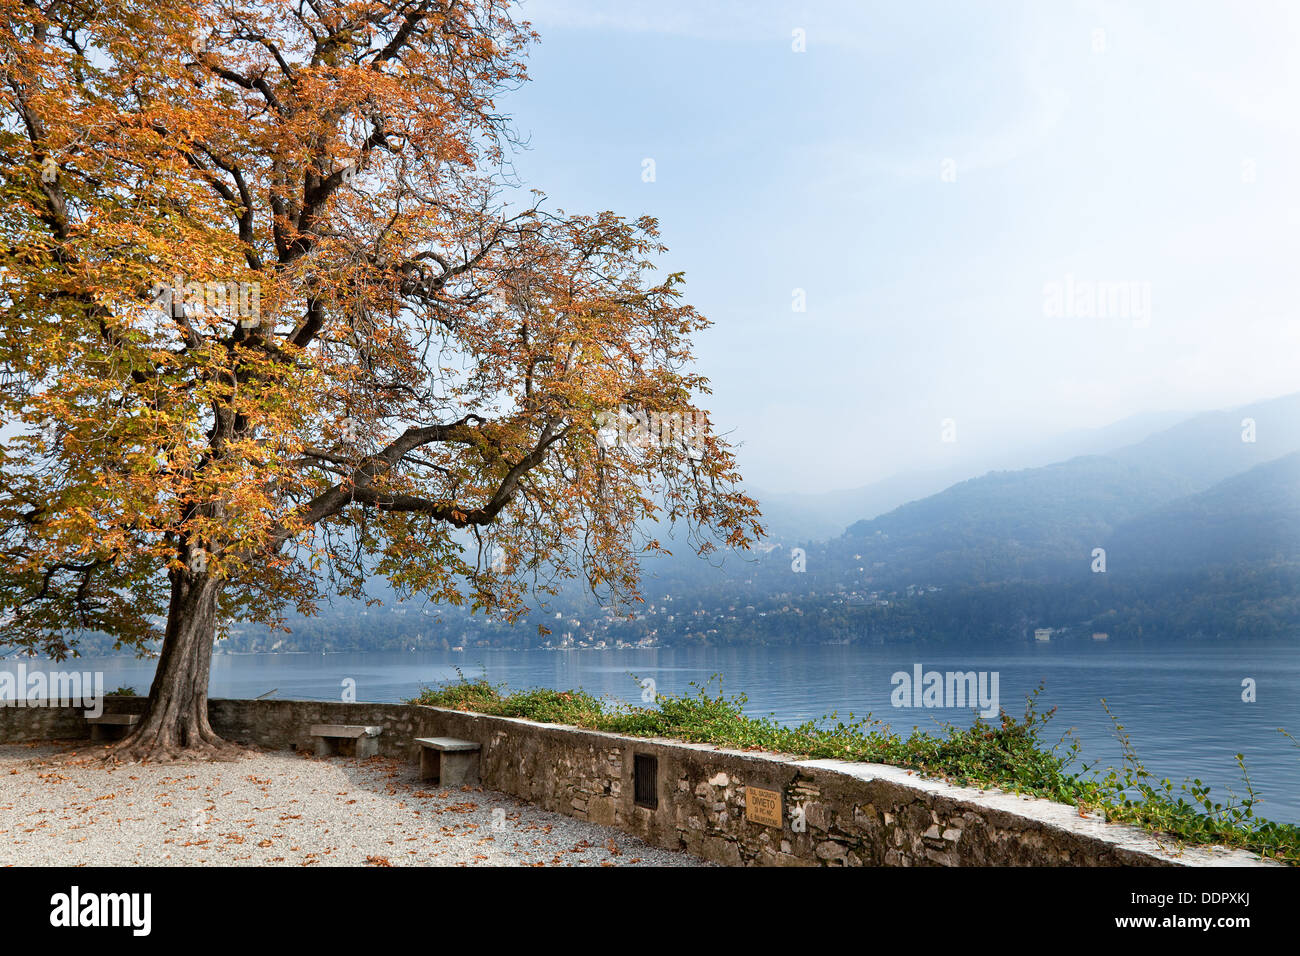 Beautiful old horsechestnut tree in autumn splendour beside stone wall overlooking blue calm waters of lake Como on misty fall a Stock Photo